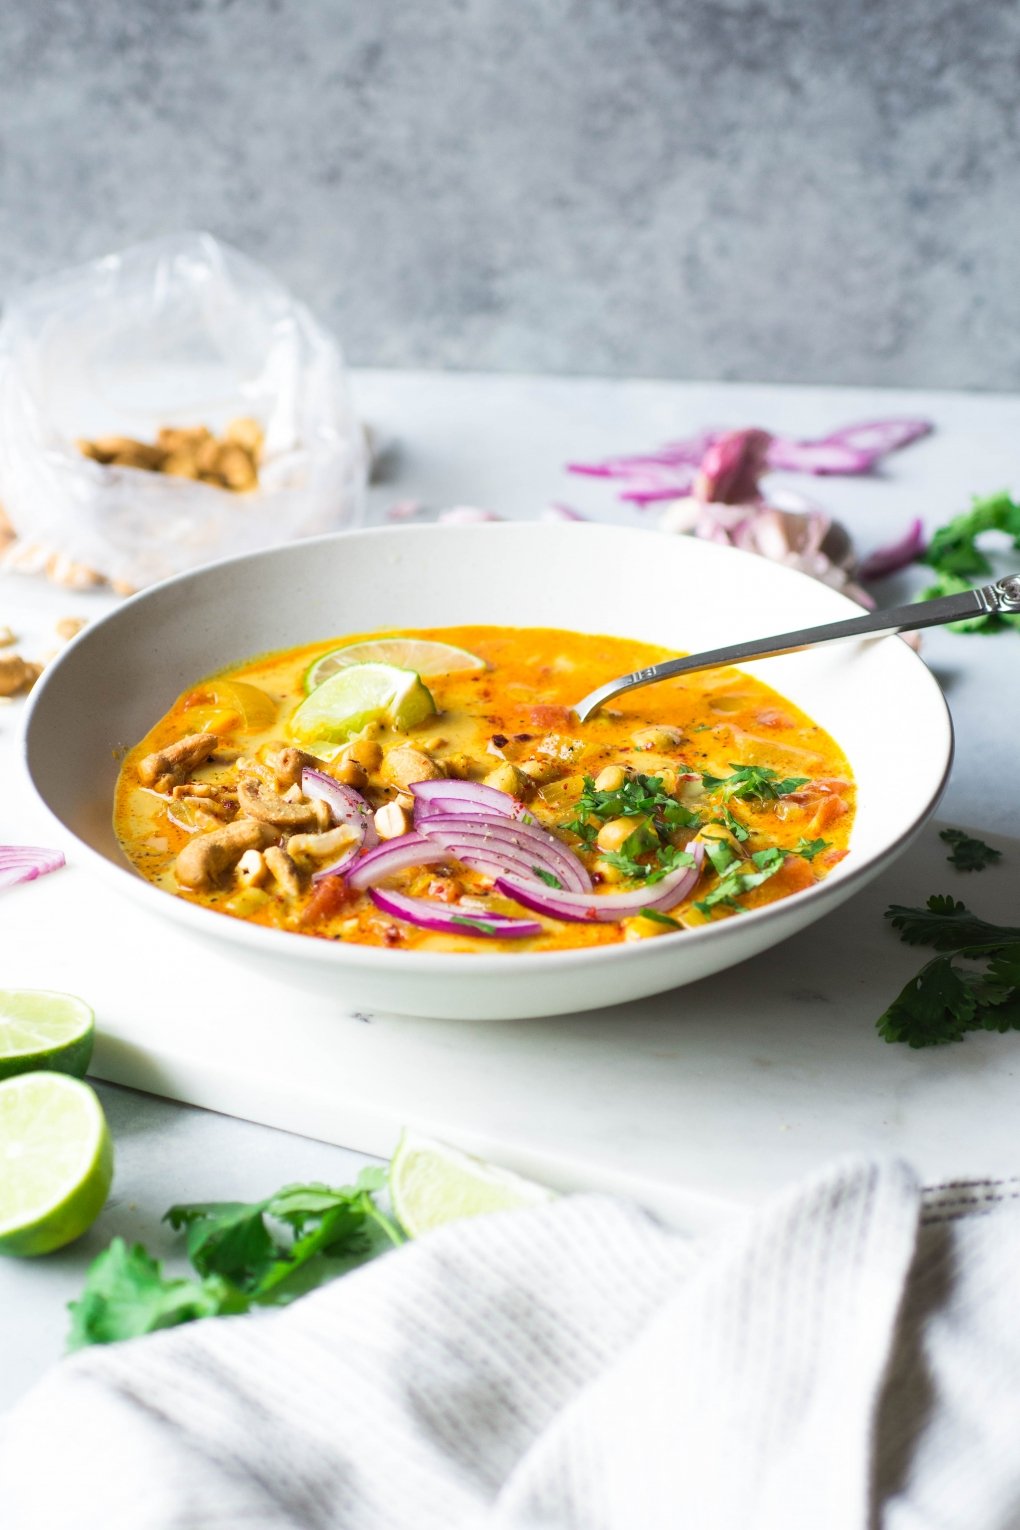 Side angle shot of a large white bowl of bright orange chickpea and tomato coconut curry soup. Soup is topped with fresh red onion slices, chopped herbs, curry spiced cashews, and lime wedges. On a white background next to scattered herbs, lime wedges, and cashew bits.